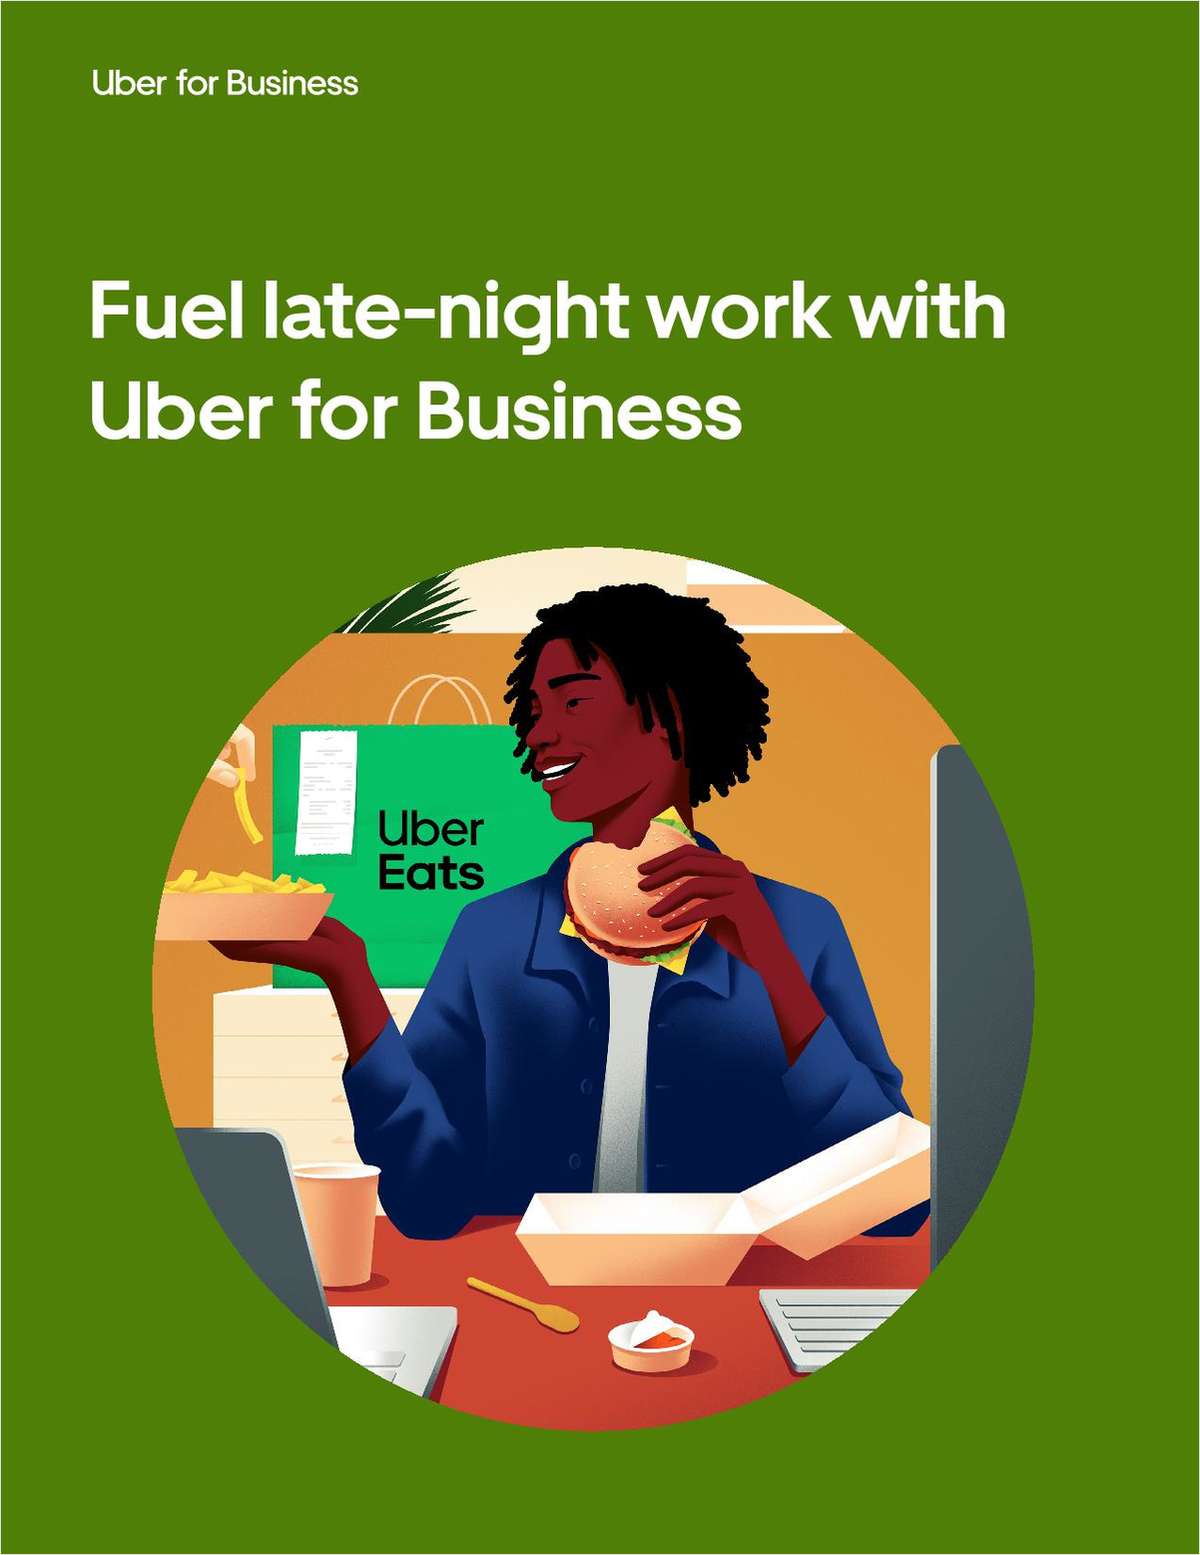 Fuel late-night work with Uber for Business